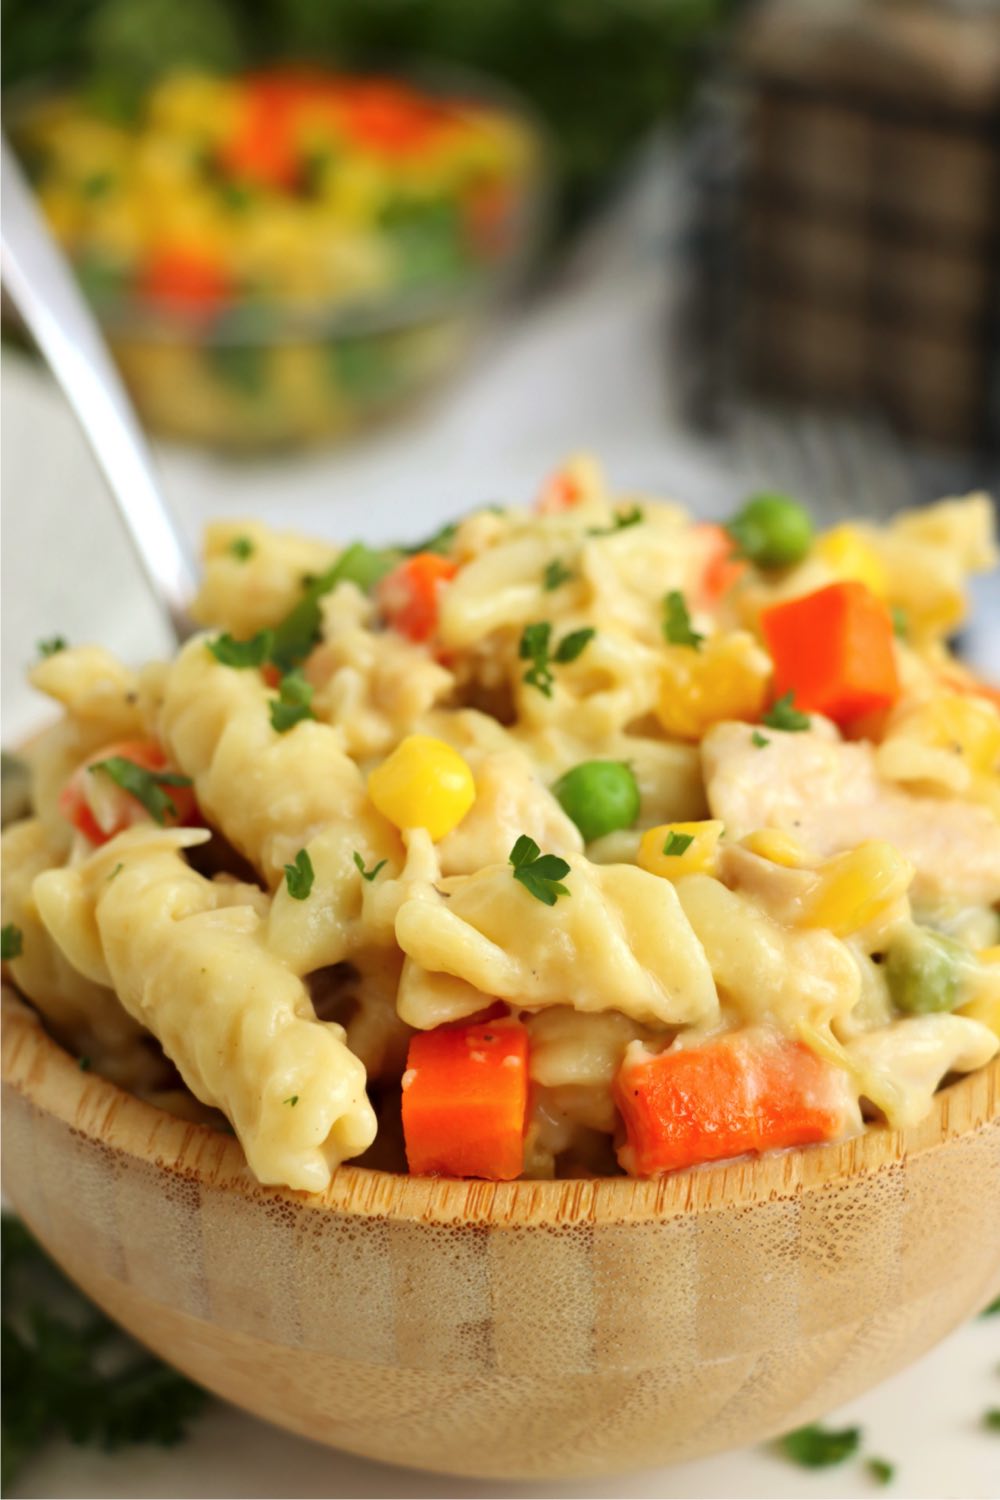 up close shot of rotini pasta mixed with vegetables in a bowl